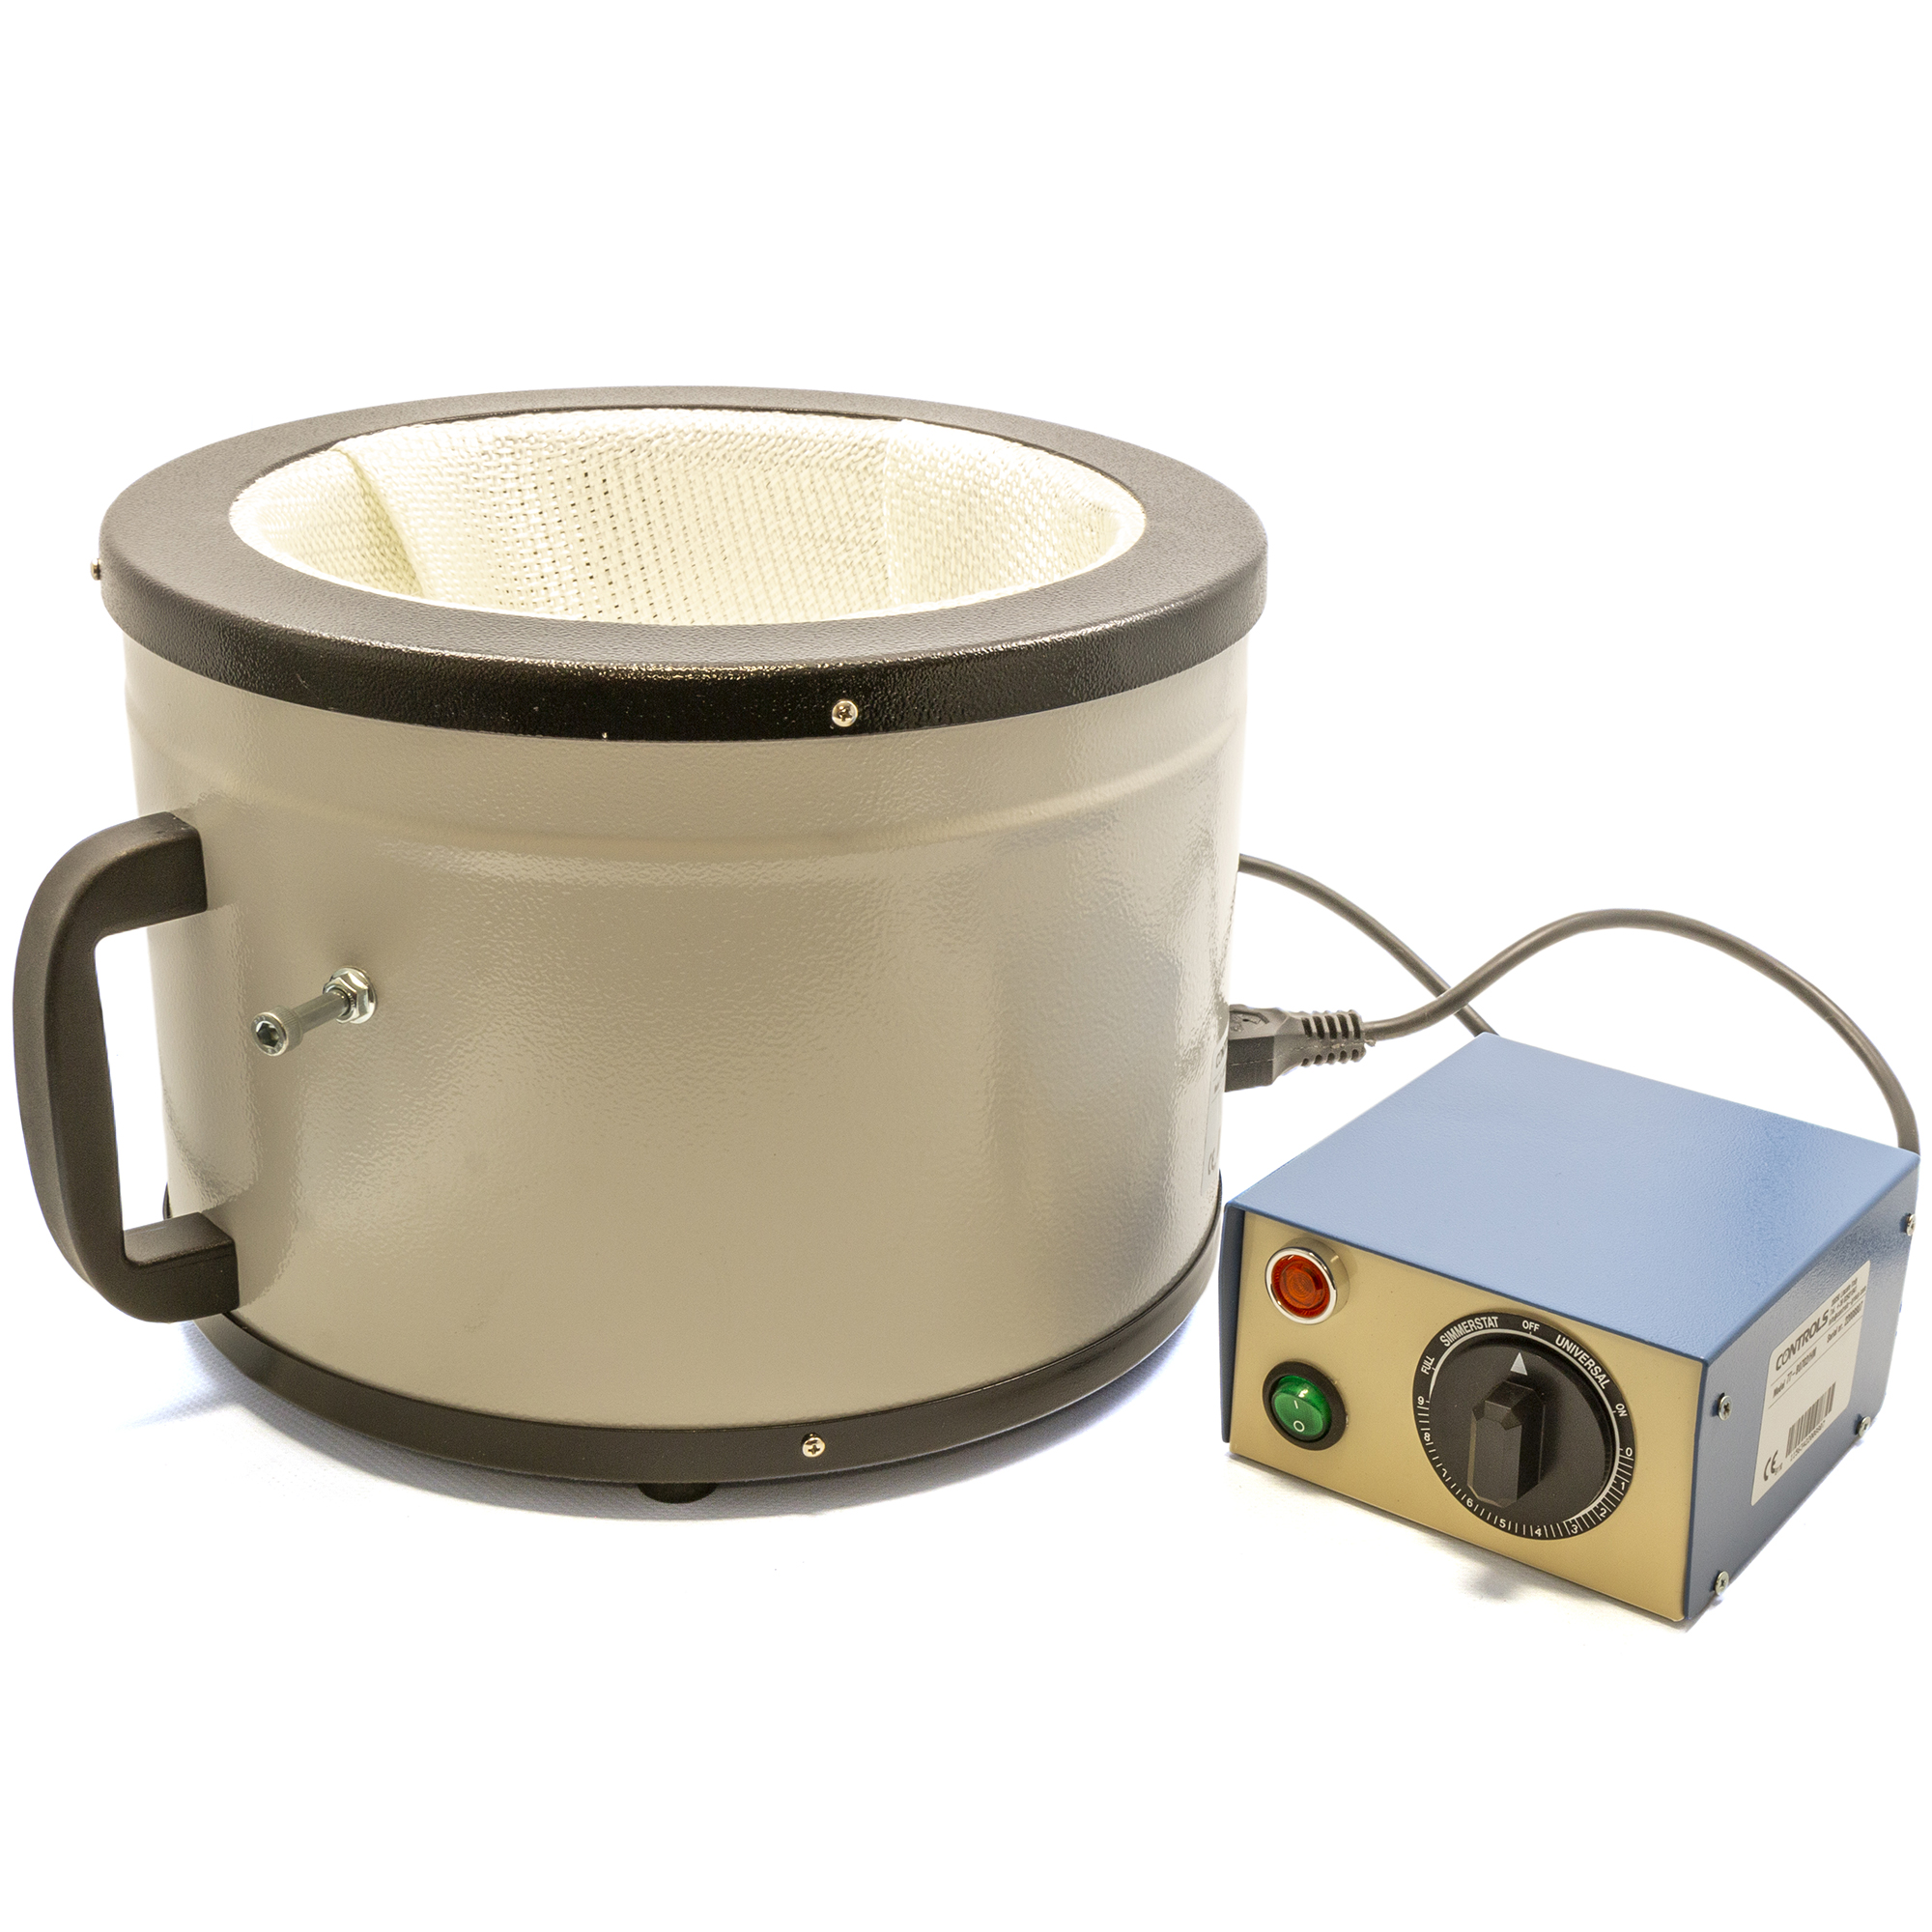 CONT 16-B0072/HM Heating mantle for mixer 10 liters capacity 16-B0072